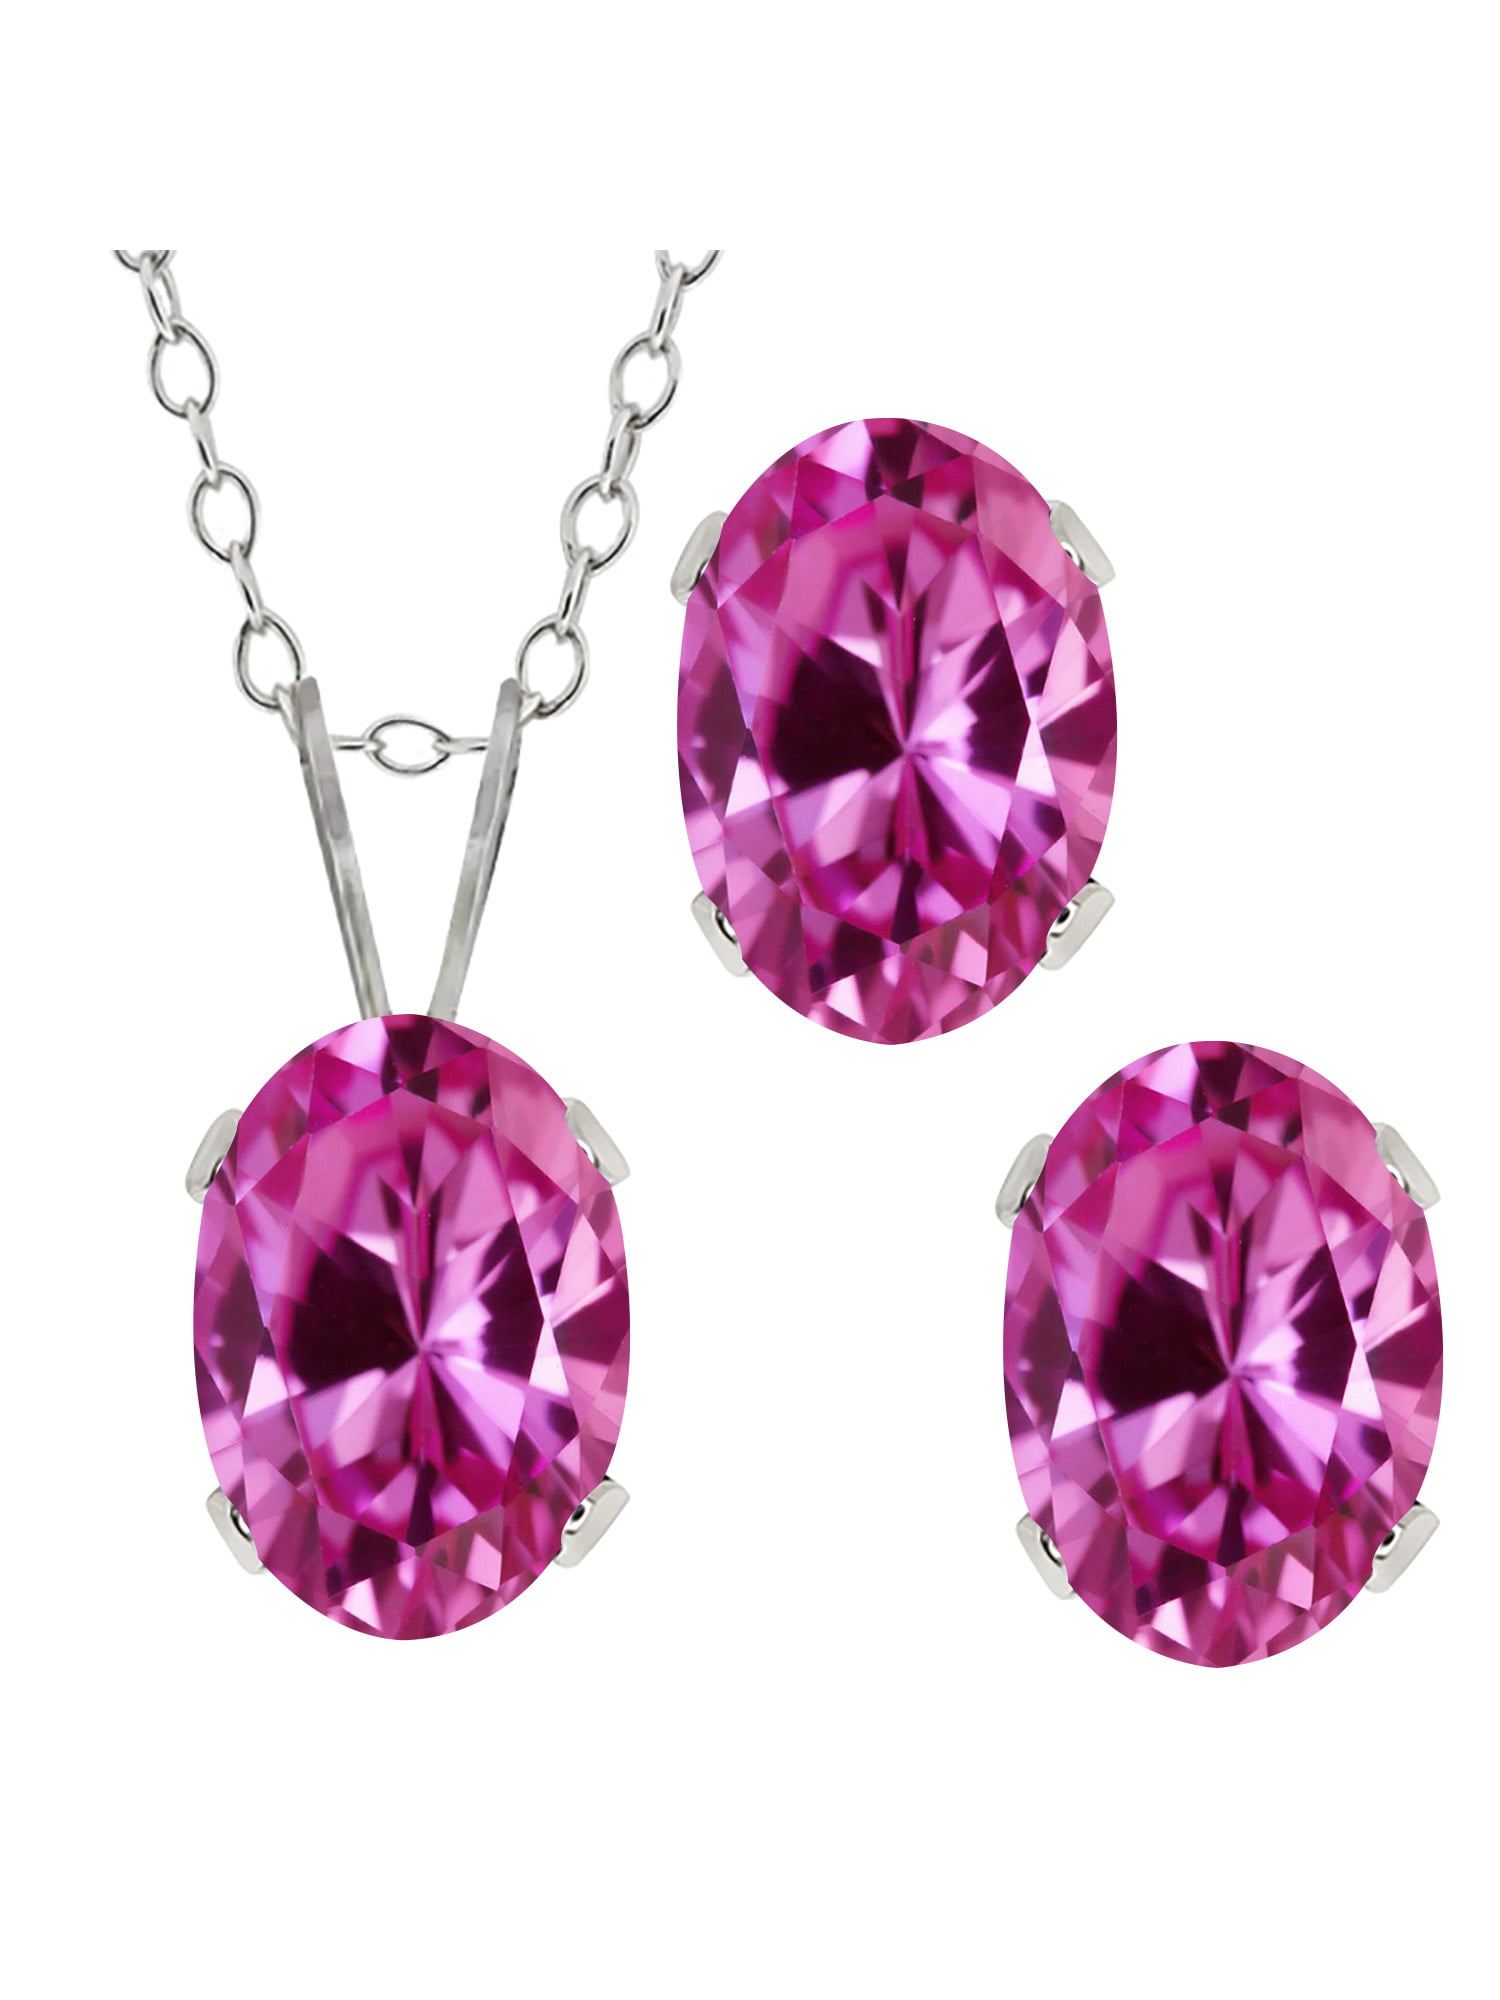 Gem Stone King 2.70 Ct Oval Pink Created Sapphire 925 Sterling Silver  Pendant Earrings Set